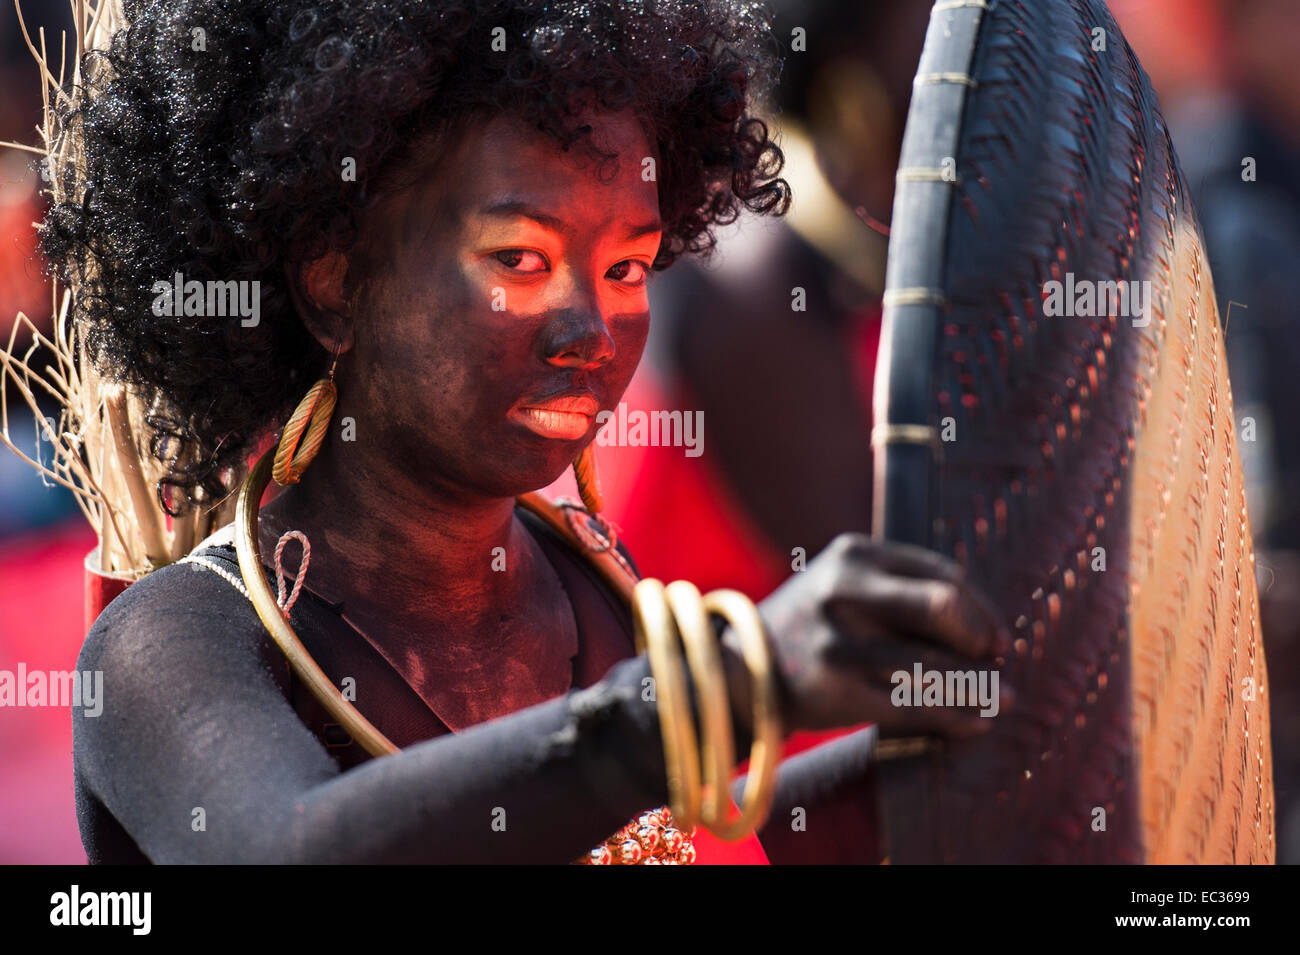 A Sinulog street dancer dressed as a native Aeta indigenous person Stock Photo